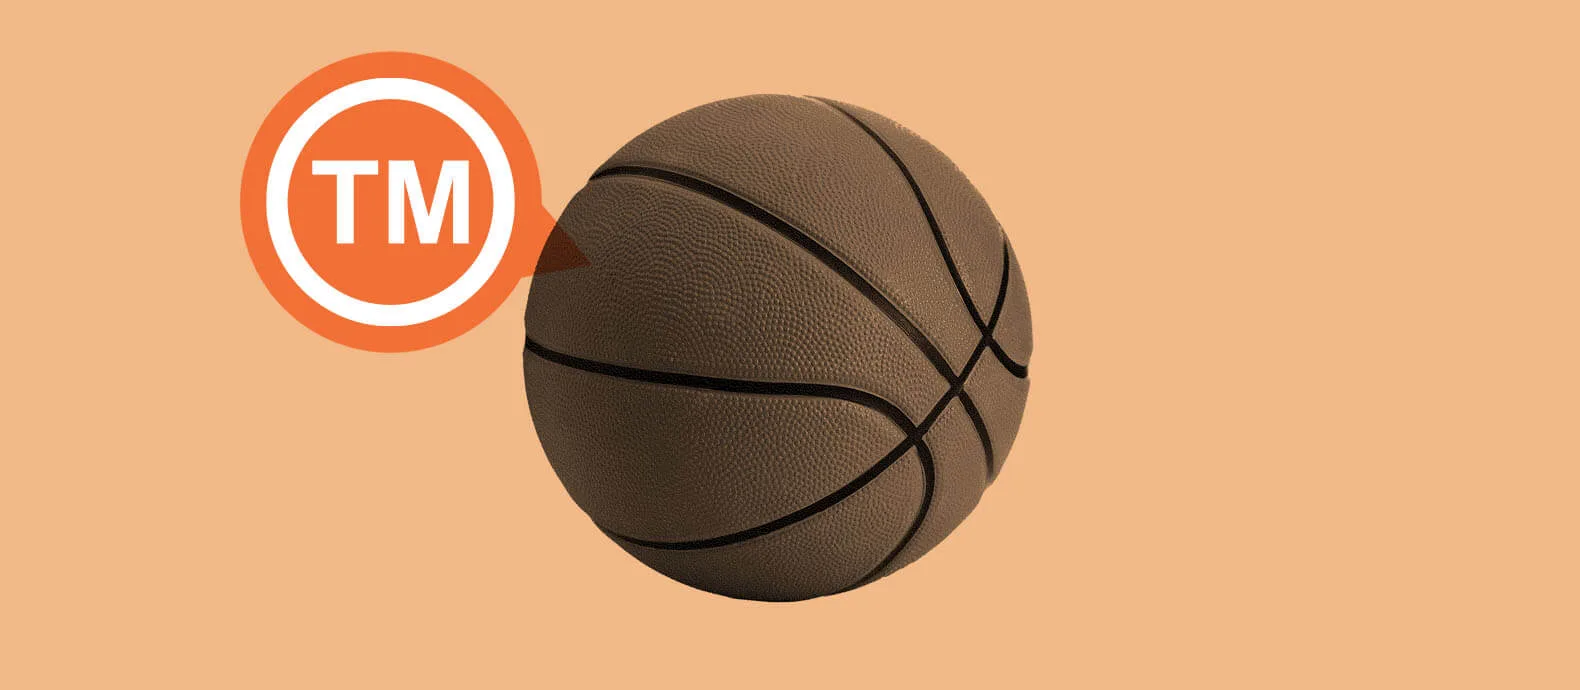 The impact of trademark infringement in the sports industry